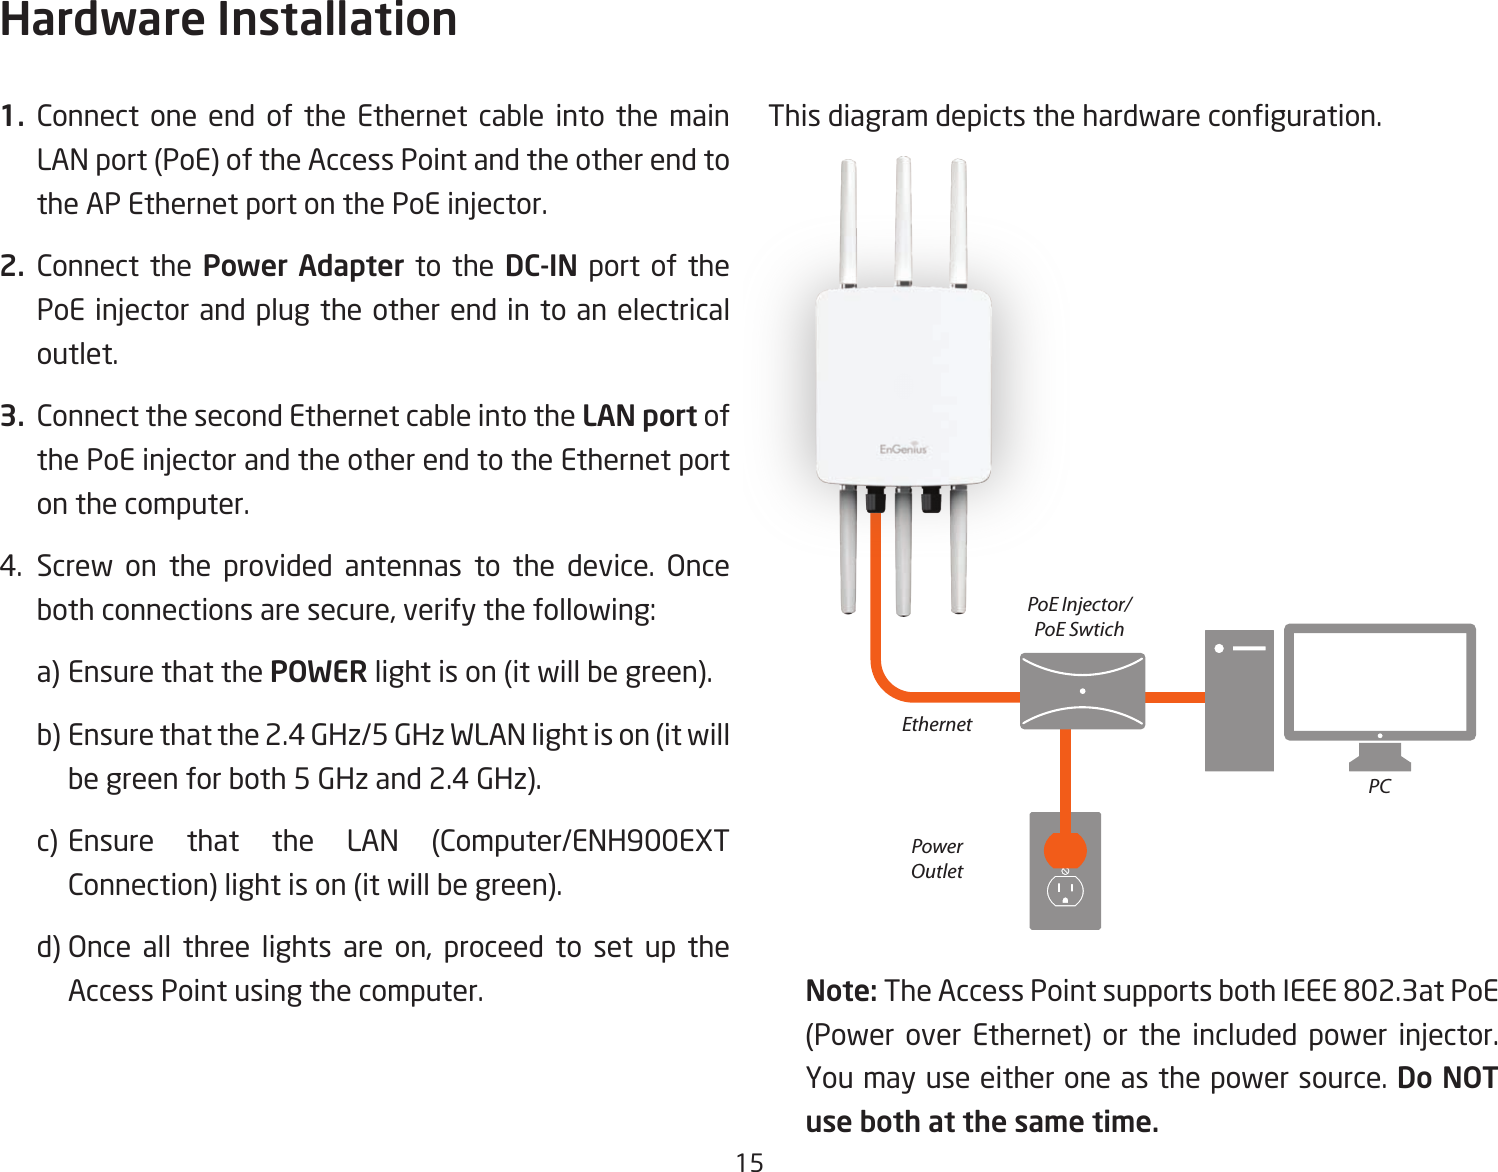 151. Connect one end of the Ethernet cable into the main LAN port (PoE) of the Access Point and the other end to theAPEthernetportonthePoEinjector.2. Connect the Power Adapter to the DC-IN port of the PoEinjectorand plugtheotherendintoanelectricaloutlet.3.  Connect the second Ethernet cable into the LAN port of thePoEinjectorandtheotherendtotheEthernetporton the computer.4. Screw on the provided antennas to the device. Once both connections are secure, verify the following:    a) Ensure that the POWER light is on (it will be green).    b) Ensure that the 2.4 GHz/5 GHz WLAN light is on (it will   be green for both 5 GHz and 2.4 GHz).  c) Ensure that the LAN (Computer/ENH900EXT    Connection) light is on (it will be green).   d) Once all three lights are on, proceed to set up the    Access Point using the computer.Thisdiagramdepictsthehardwareconguration.Note: TheAccessPointsupportsbothIEEE802.3atPoE(Power over Ethernet) or the included power injector.You may use either one as the power source. Do NOT use both at the same time.Hardware InstallationEthernetPCPowerOutletPoE Injector/PoE Swtich